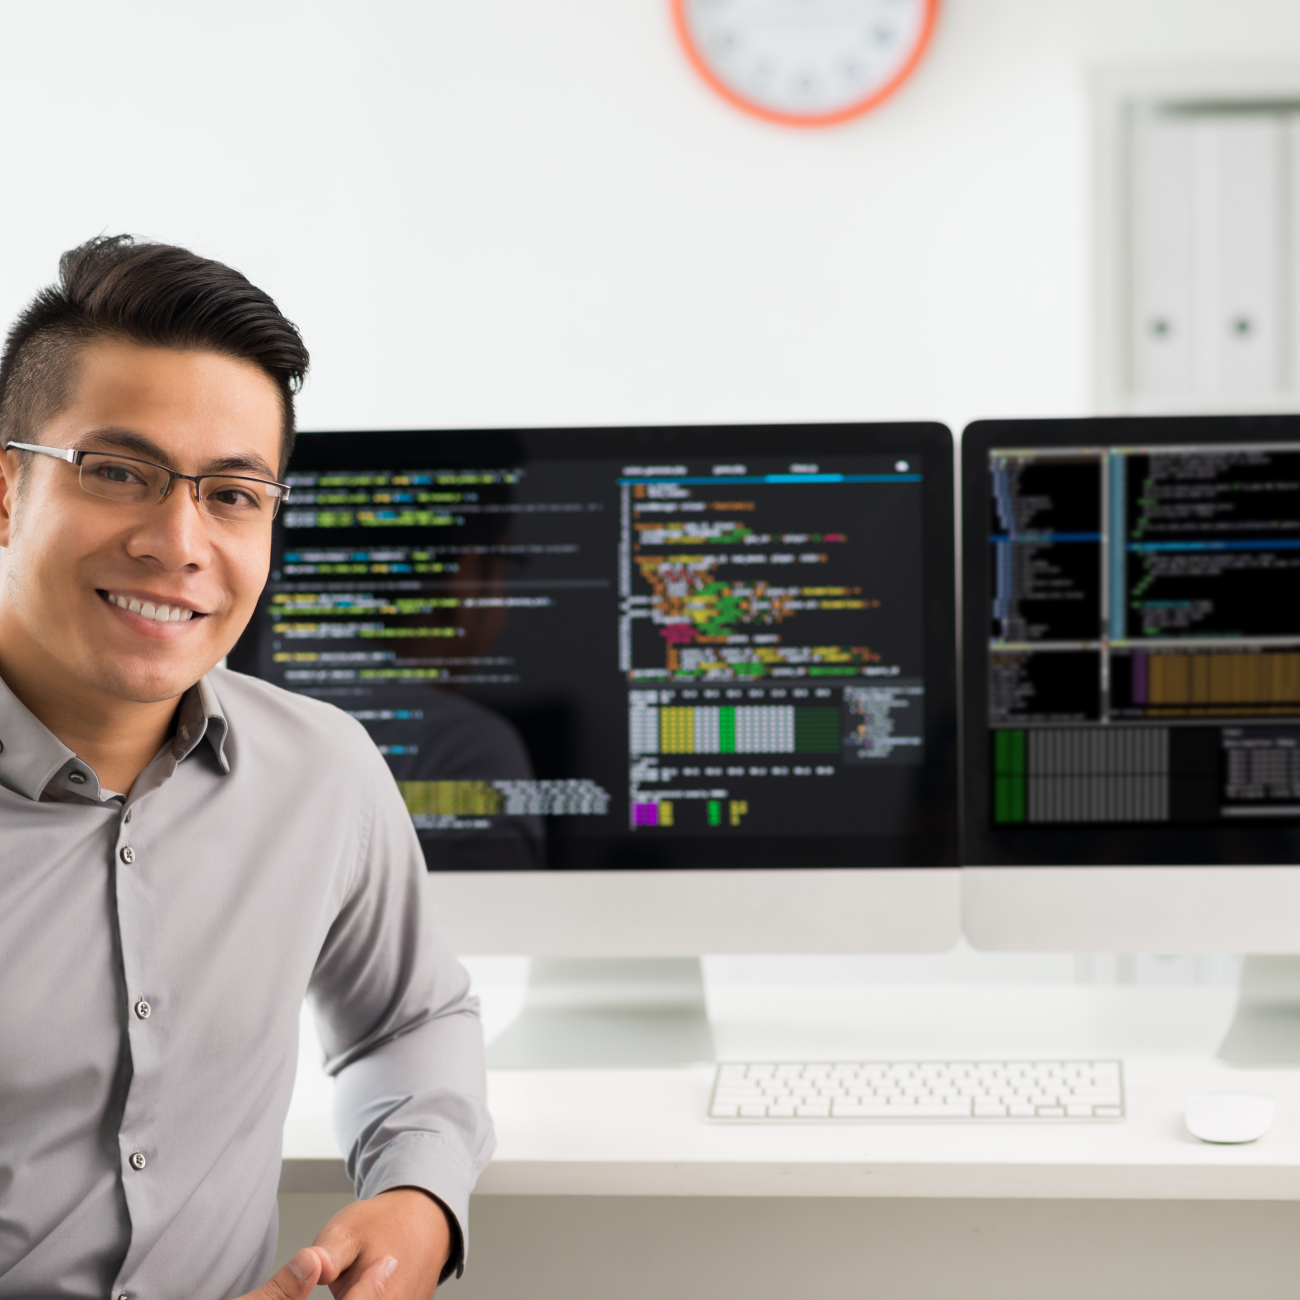 Man smiling and sitting by computer showing code